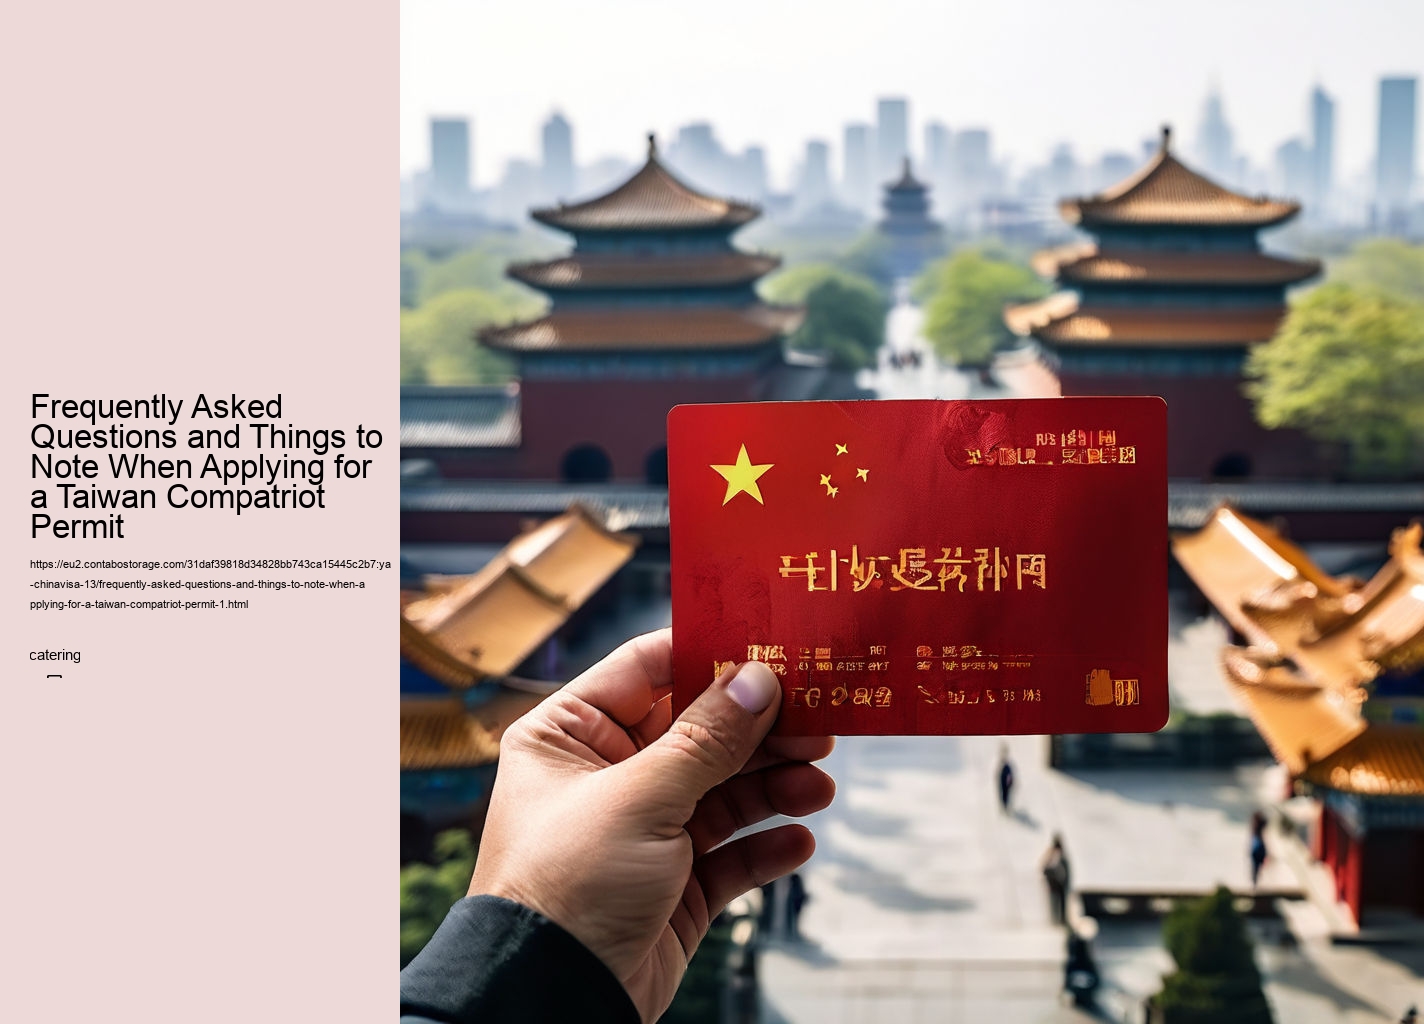 Frequently Asked Questions and Things to Note When Applying for a Taiwan Compatriot Permit